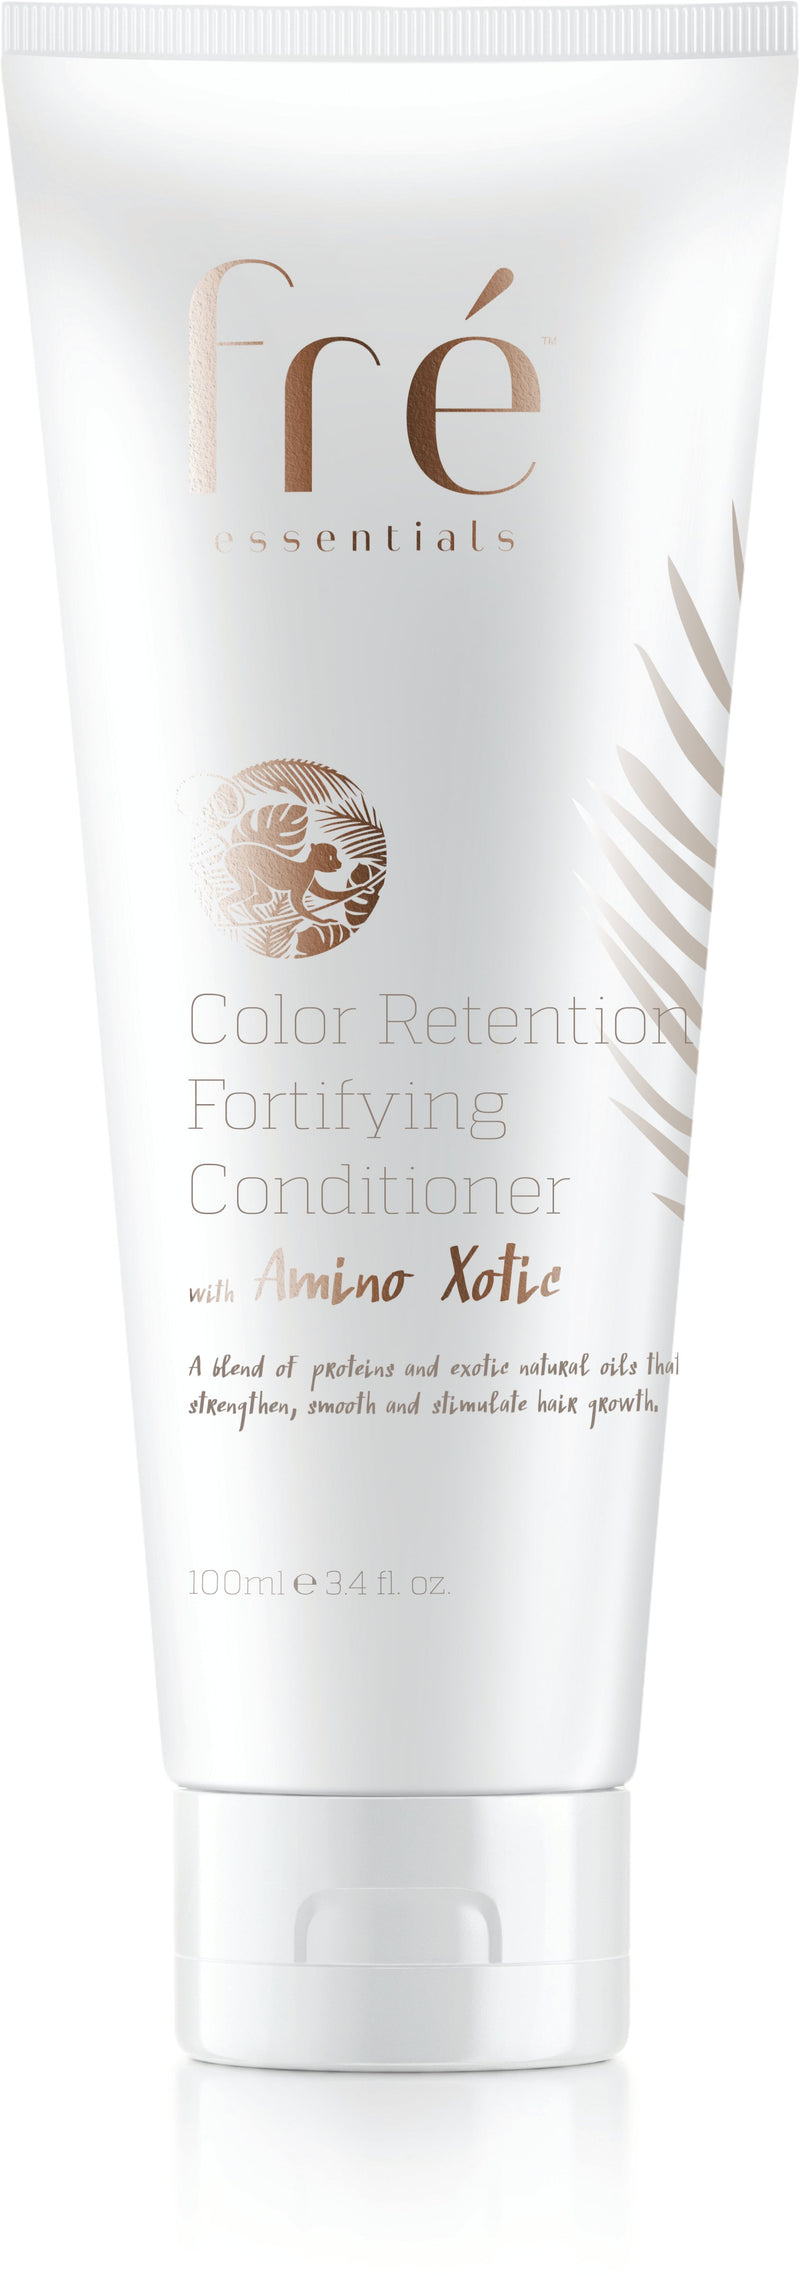 Color Retention Fortifying Conditioner with Amino Xotic (SALON)